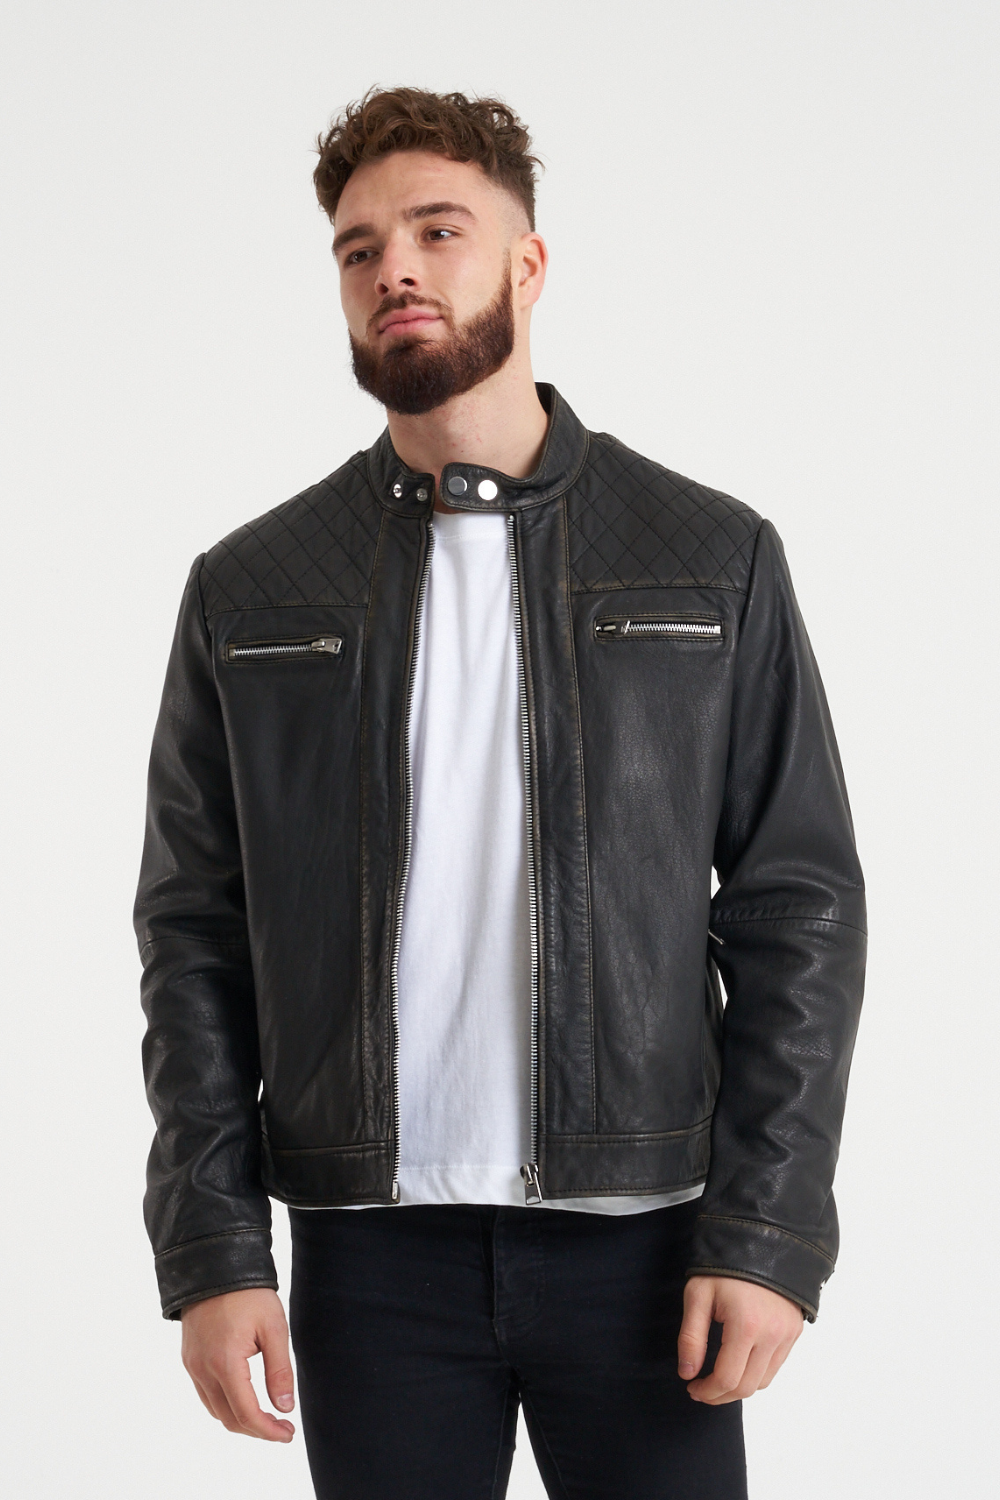 Washed leather, tab neck collar and subtle shoulder quilted stitch - what more could you want from a classic leather jacket? The iconic BARNEYS ORIGINALS James jacket is made from super soft sheep leather that boasts timeless style and prevailing durability. As seen on the likes of Jason Statham, this biker jacket is a must have for any occassion.